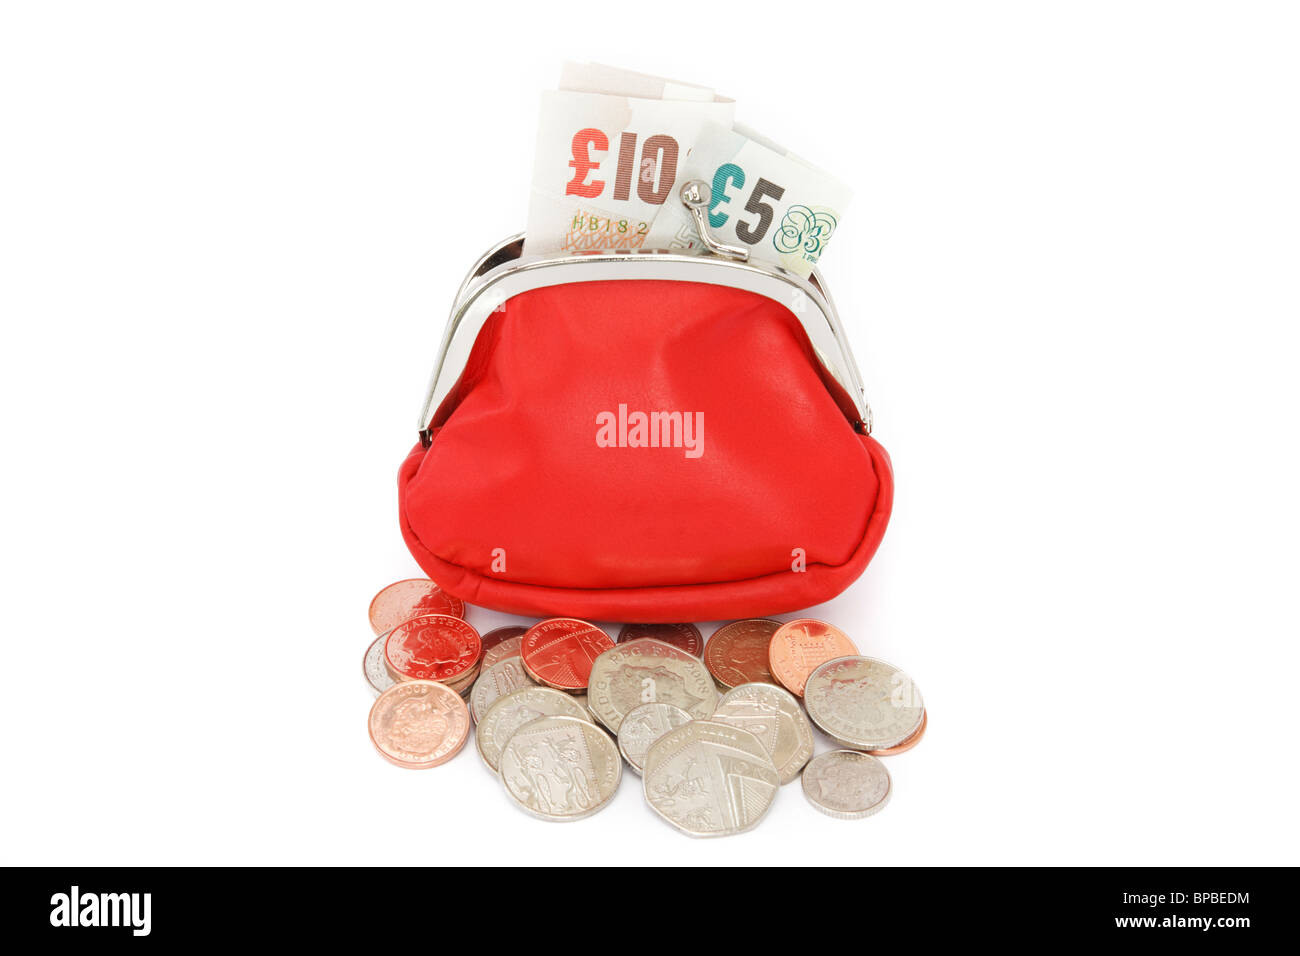 Open red money purse containing ten and five pound notes with some coins spilling out isolated on a plain white background. England, UK, Britain Stock Photo